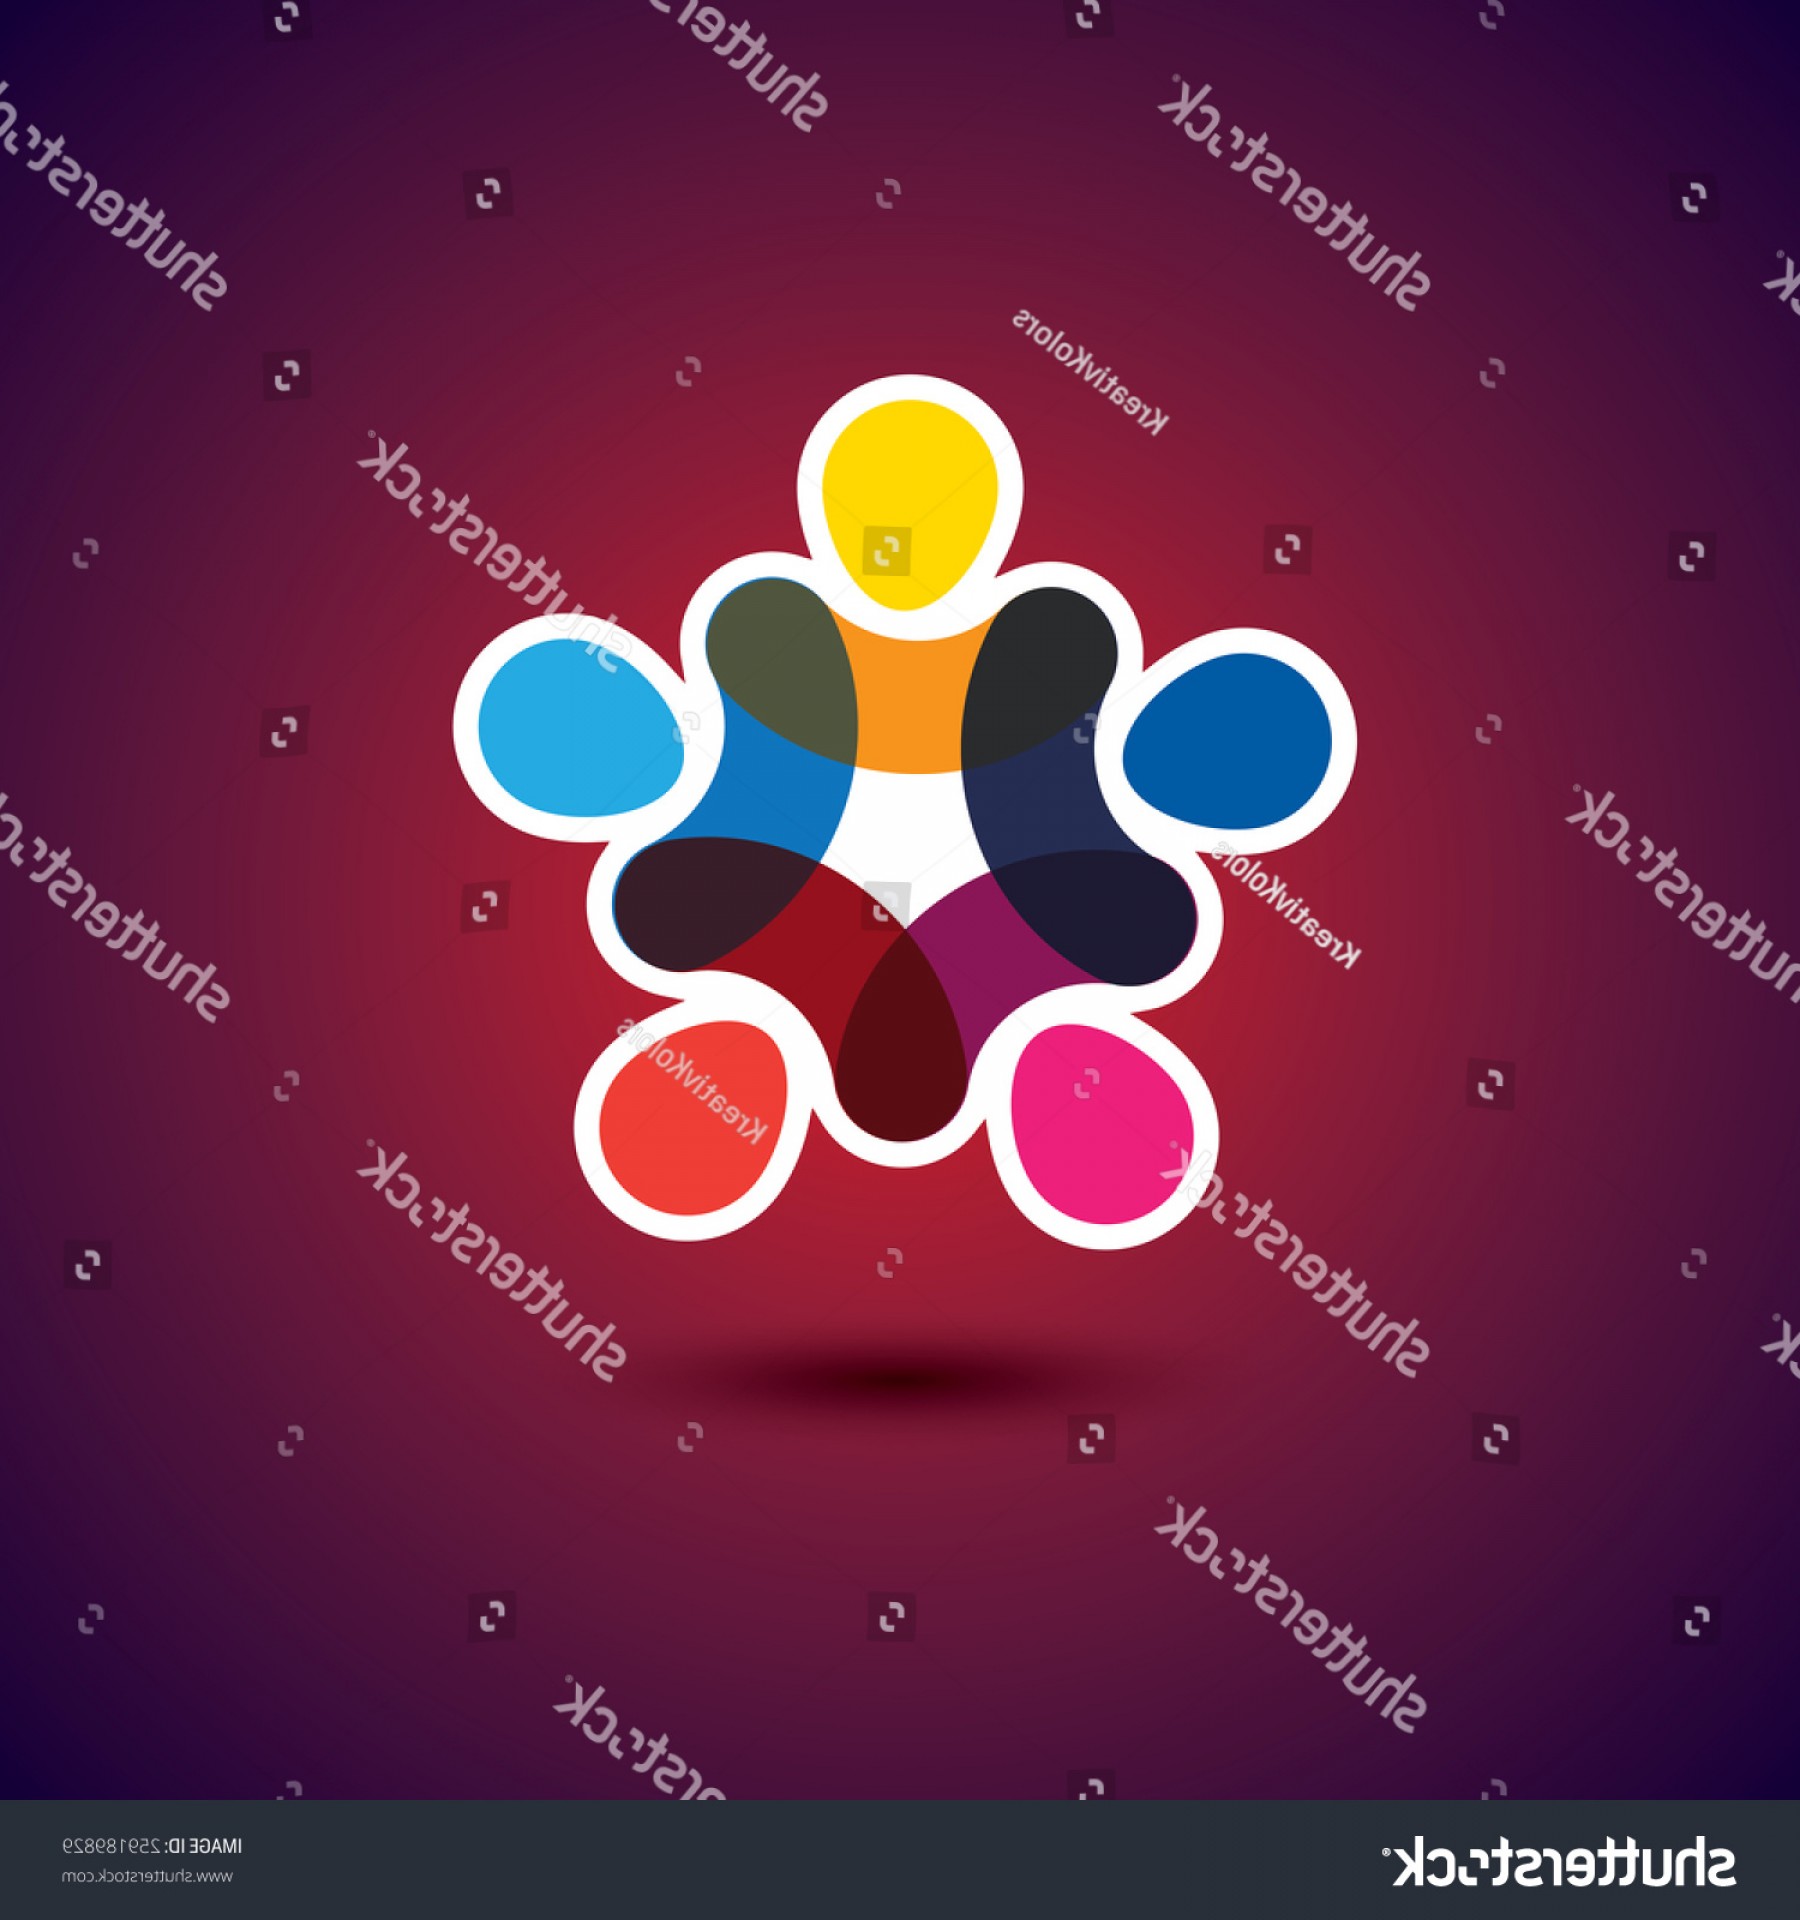 Download Vector Graphics Unity at Vectorified.com | Collection of ...